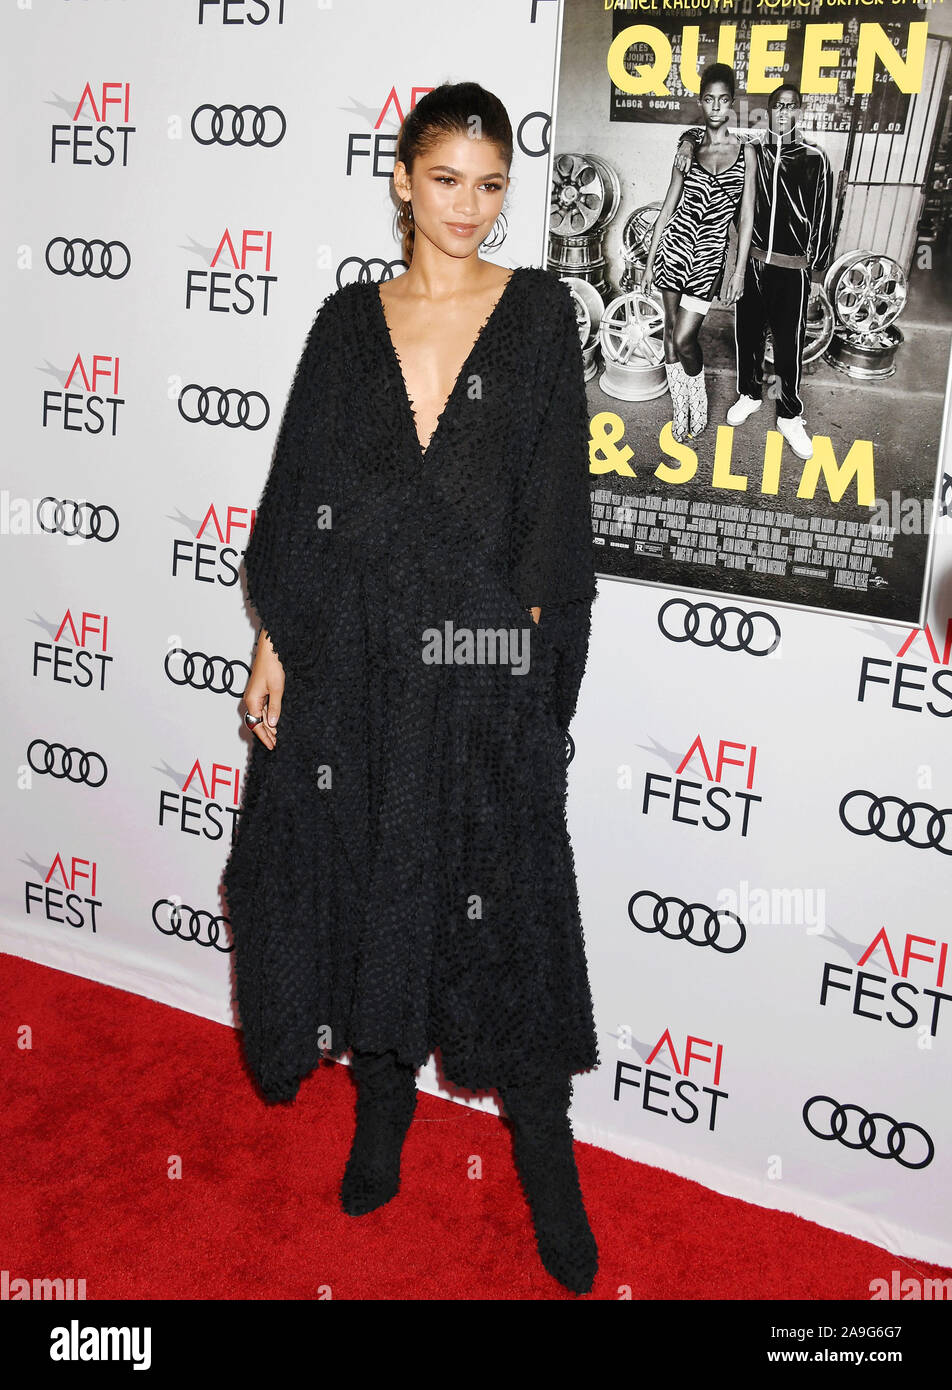 HOLLYWOOD, CA - NOVEMBER 14: Zendaya attends the 'Queen & Slim' Premiere at AFI FEST 2019 presented by Audi at the TCL Chinese Theatre on November 14, 2019 in Hollywood, California. Stock Photo